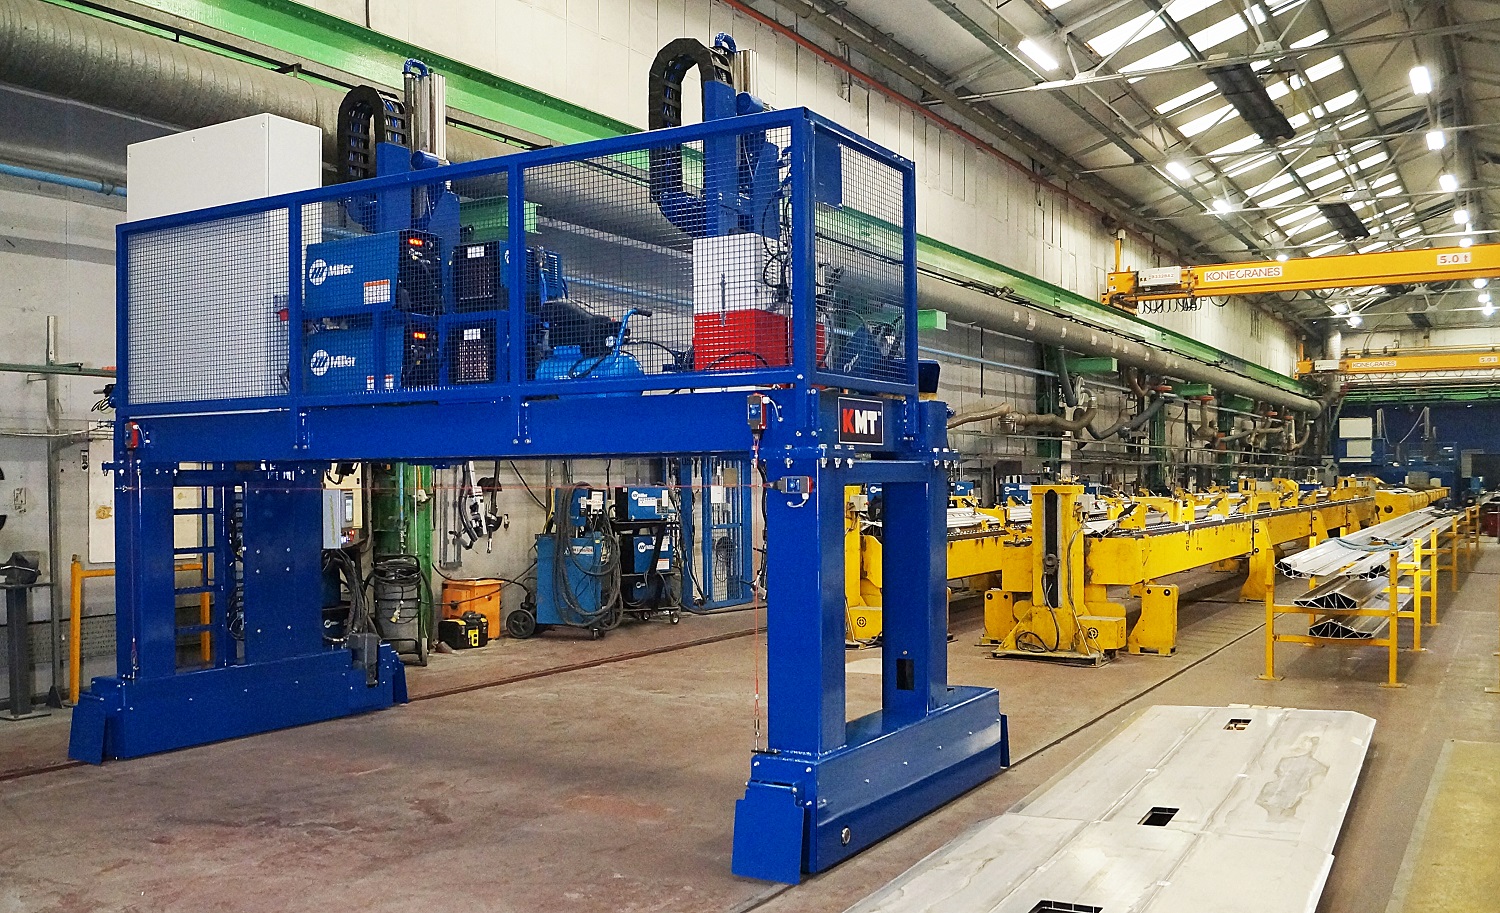 The welding gantry provided by KM Tools is a key machine in the production of train underframes and roofs.